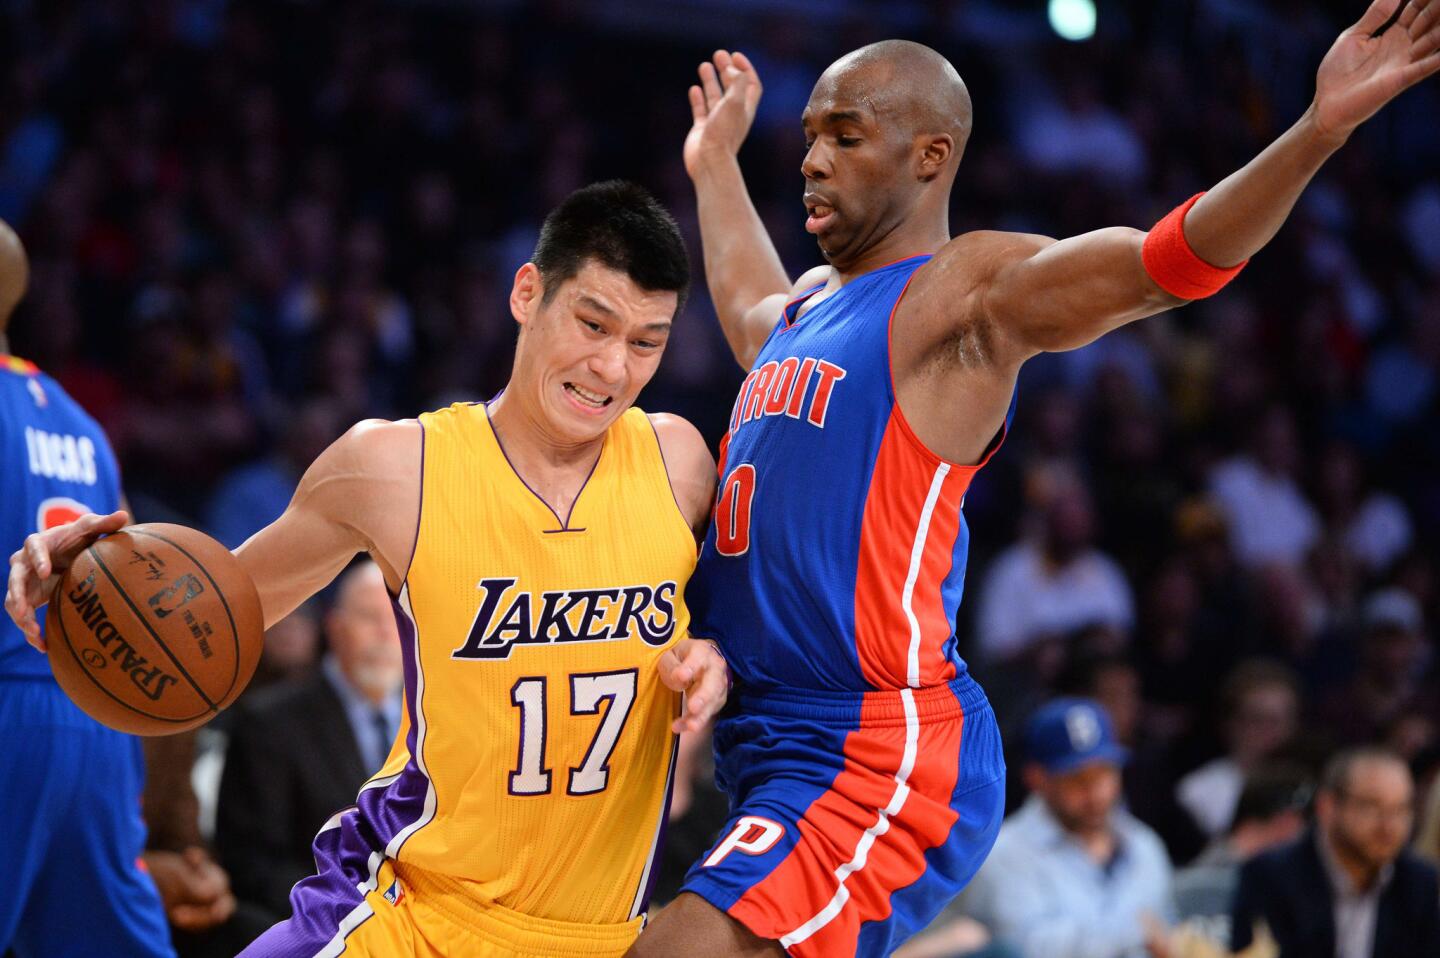 Jeremy Lin drives against Pistons guard Jodie Meeks during the first half of a game Tuesday at Staples Center.